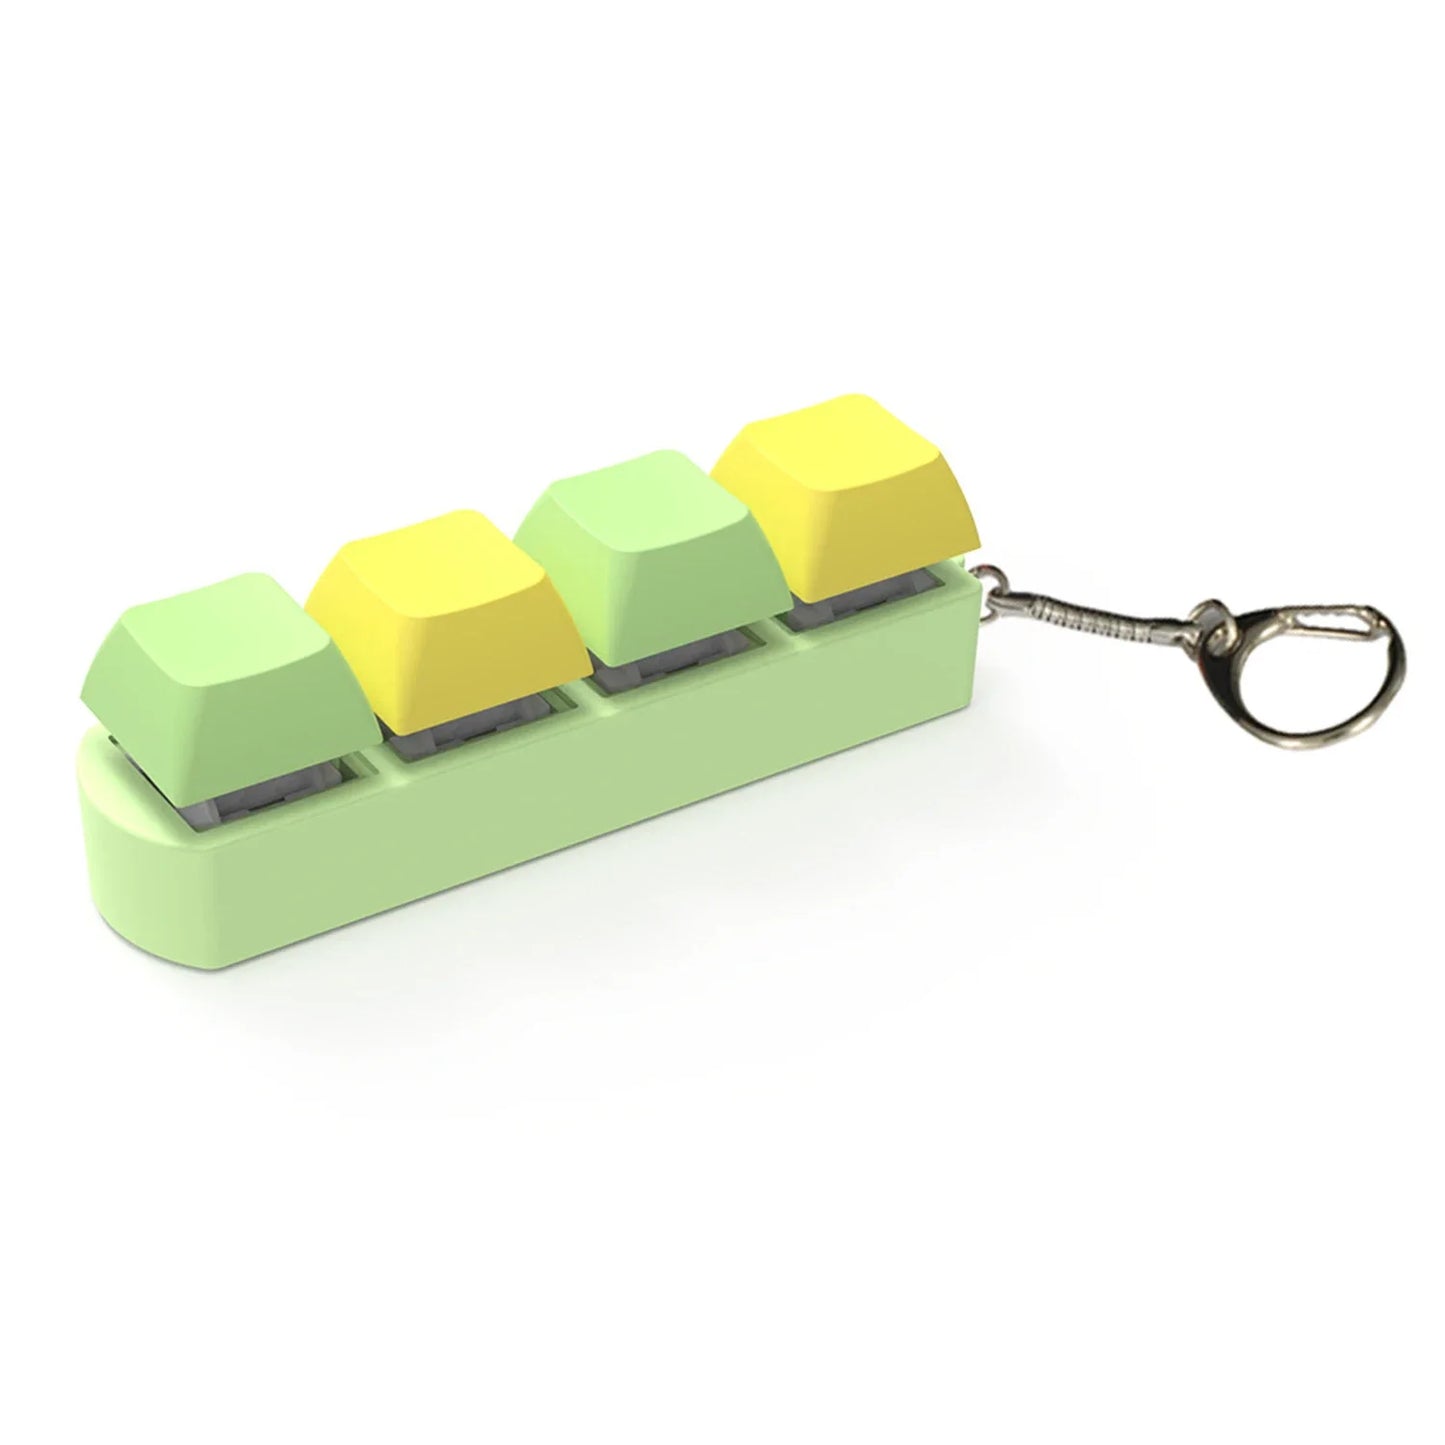 Keycap Toy Fidget with Sound Effects 4-Buttons Light Portable Stress Relief Mechanical Keyboard Clicking Sensory Keychain Green and yellow